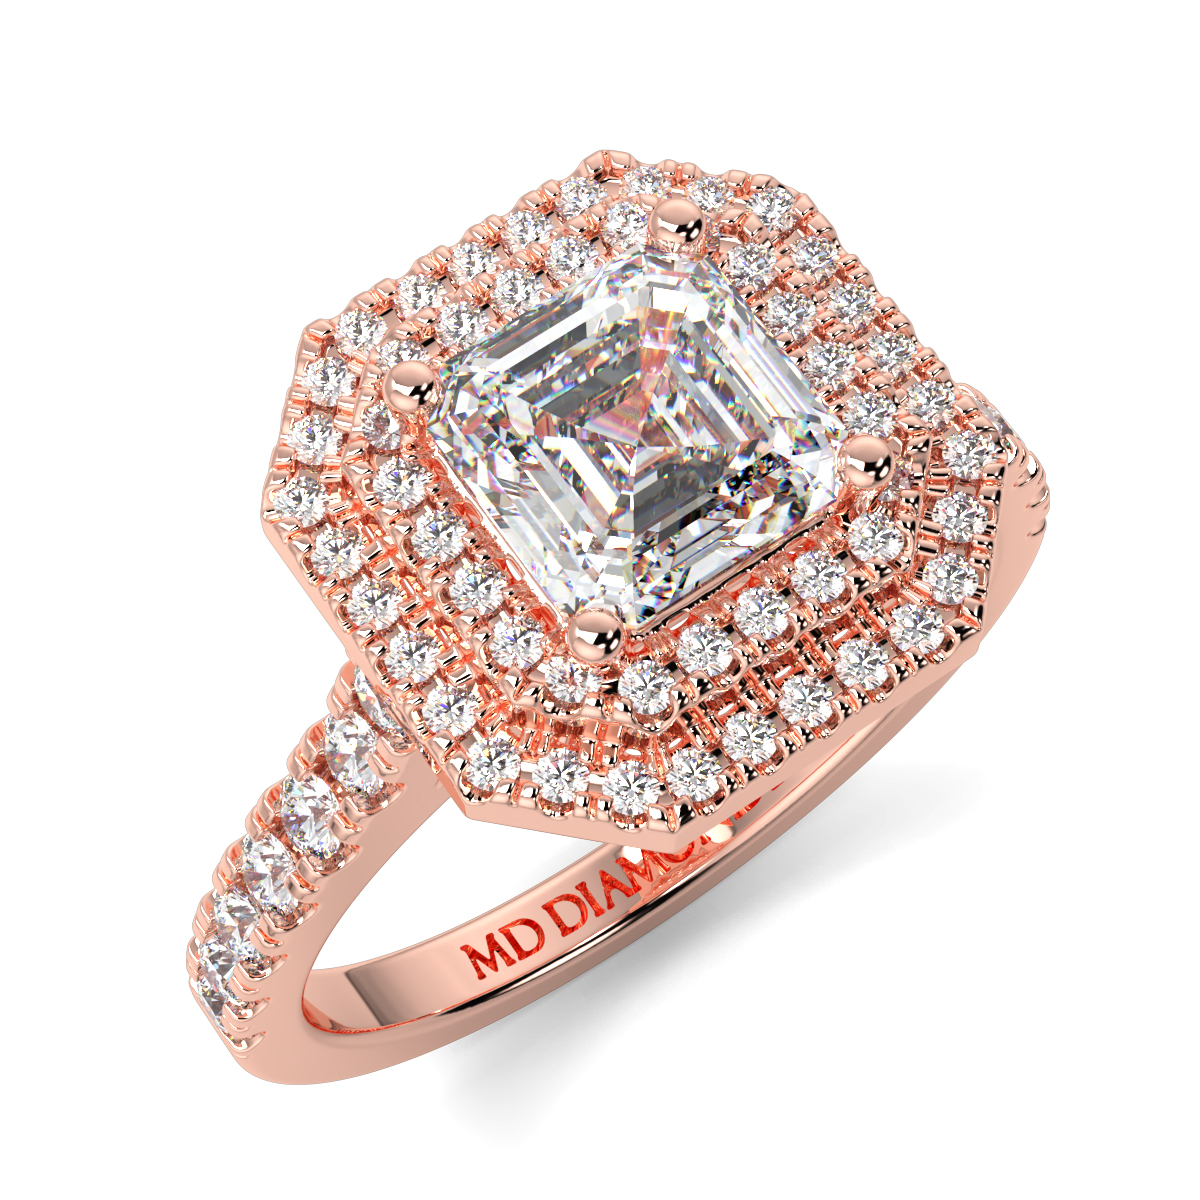 Assher Double Halo With Shoulder Diamond Ring